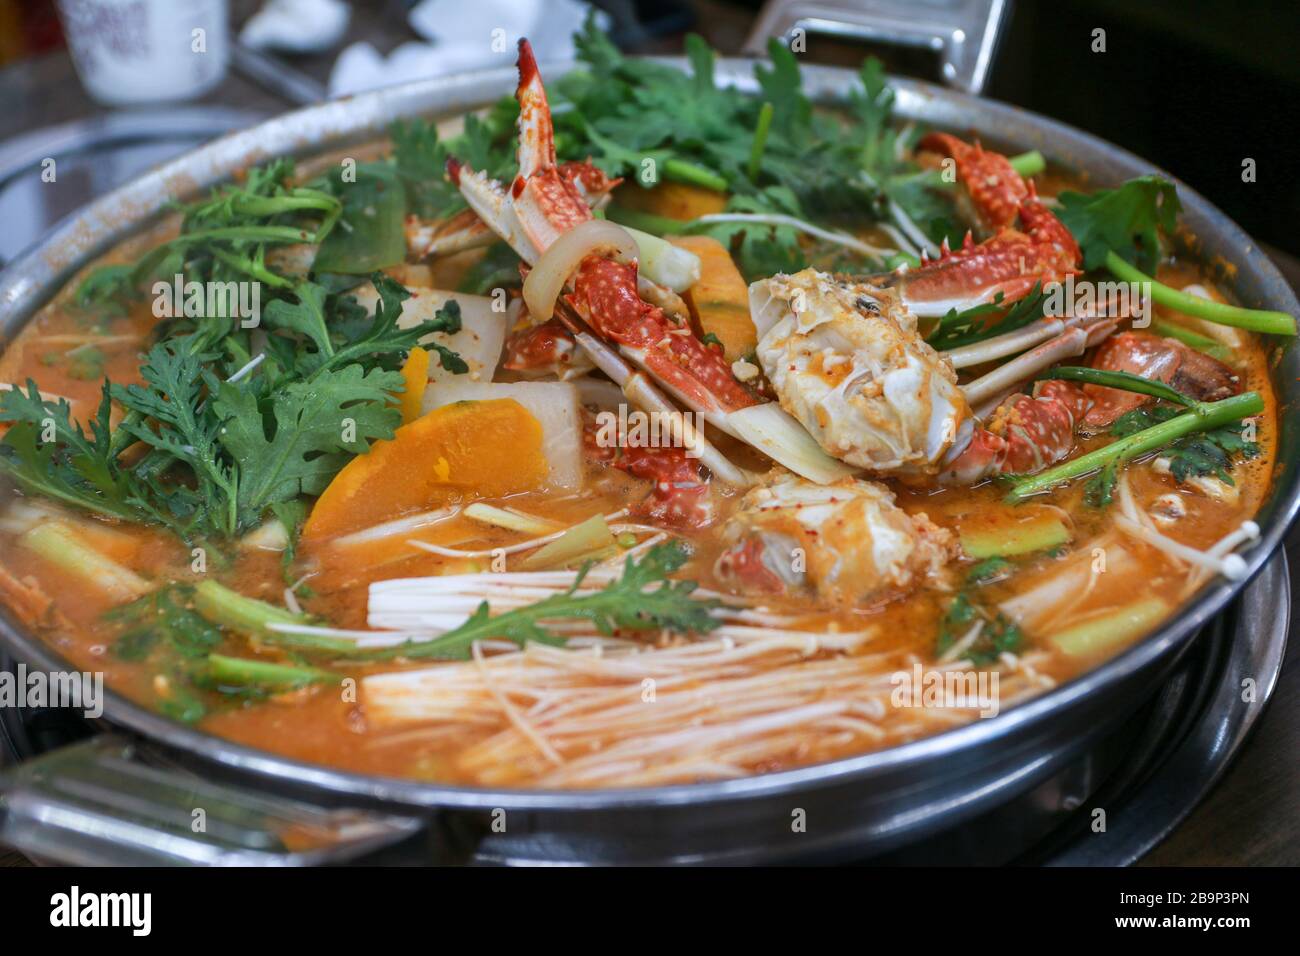 Korean Hot Pot Stock Photo, Picture and Royalty Free Image. Image 43182985.